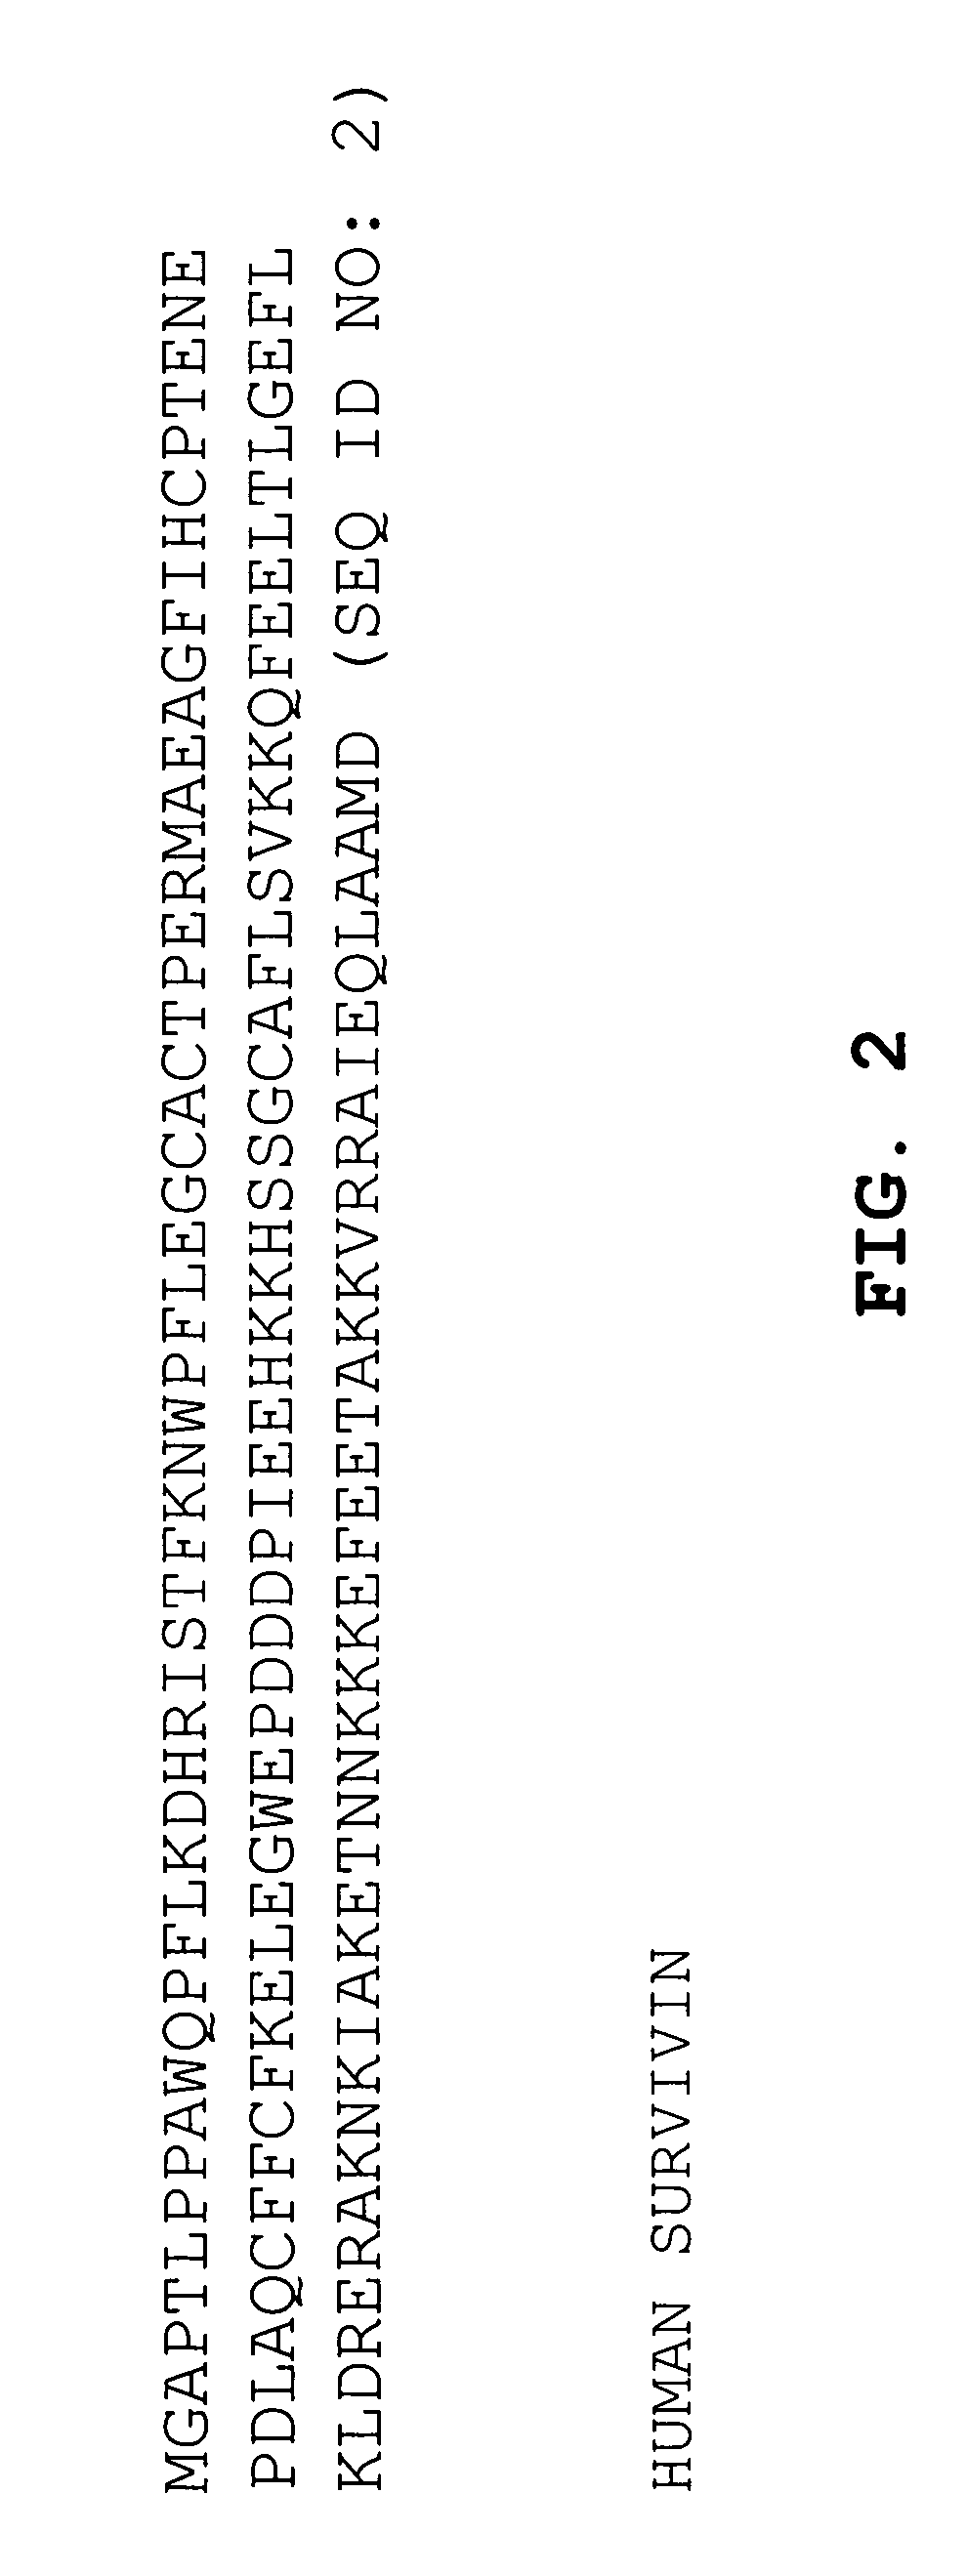 DNA vaccines against tumor growth and methods of use thereof